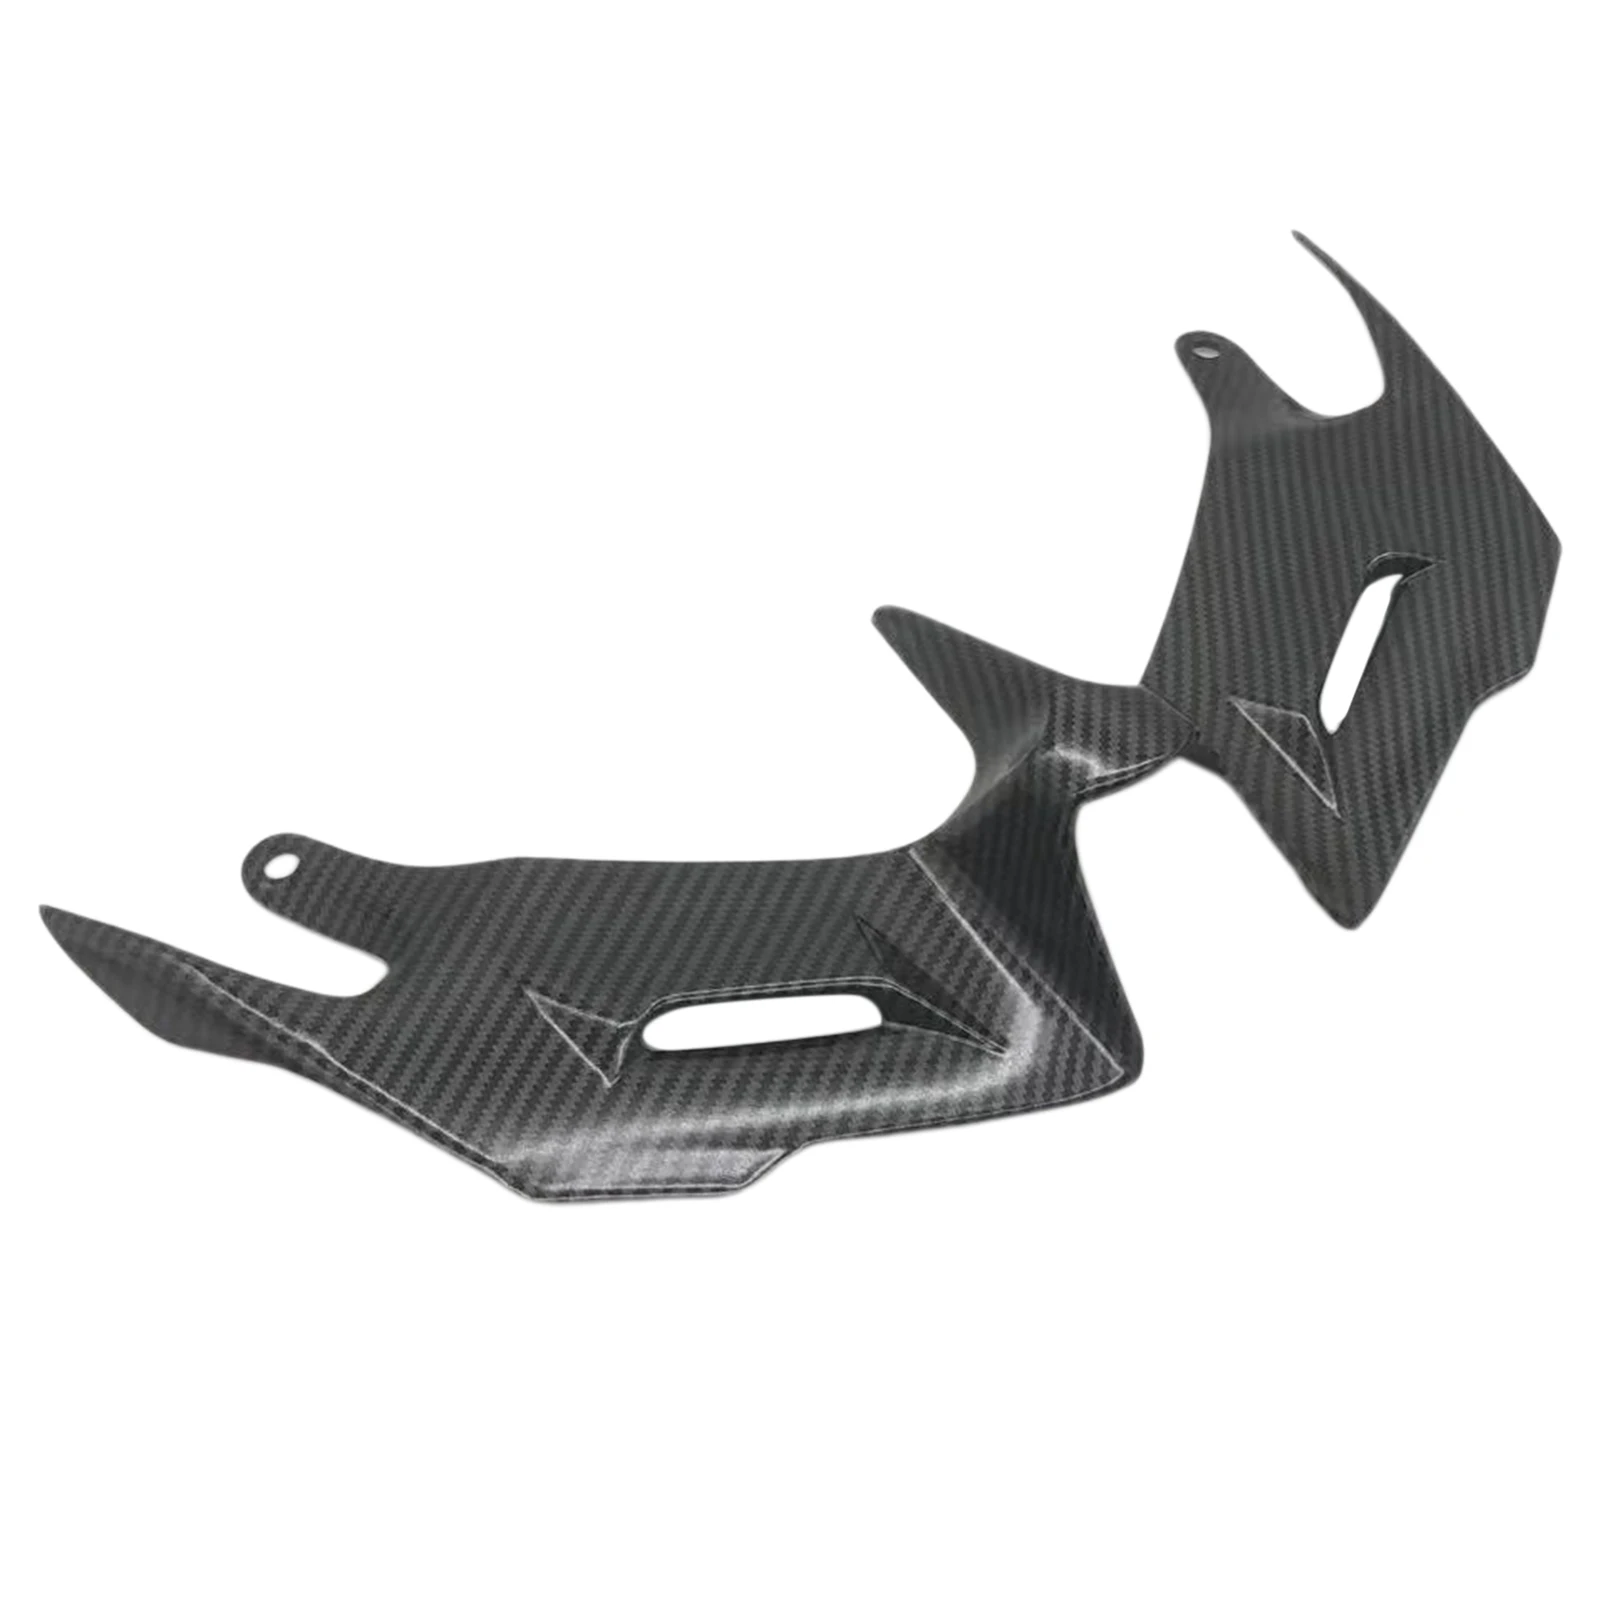 Fairing Aerodynamic Winglets Front Cover for Yamaha YZF R3 R25 2014-2018 Carbon Fiber Style Motorcycle Motorcycle Wind Wing